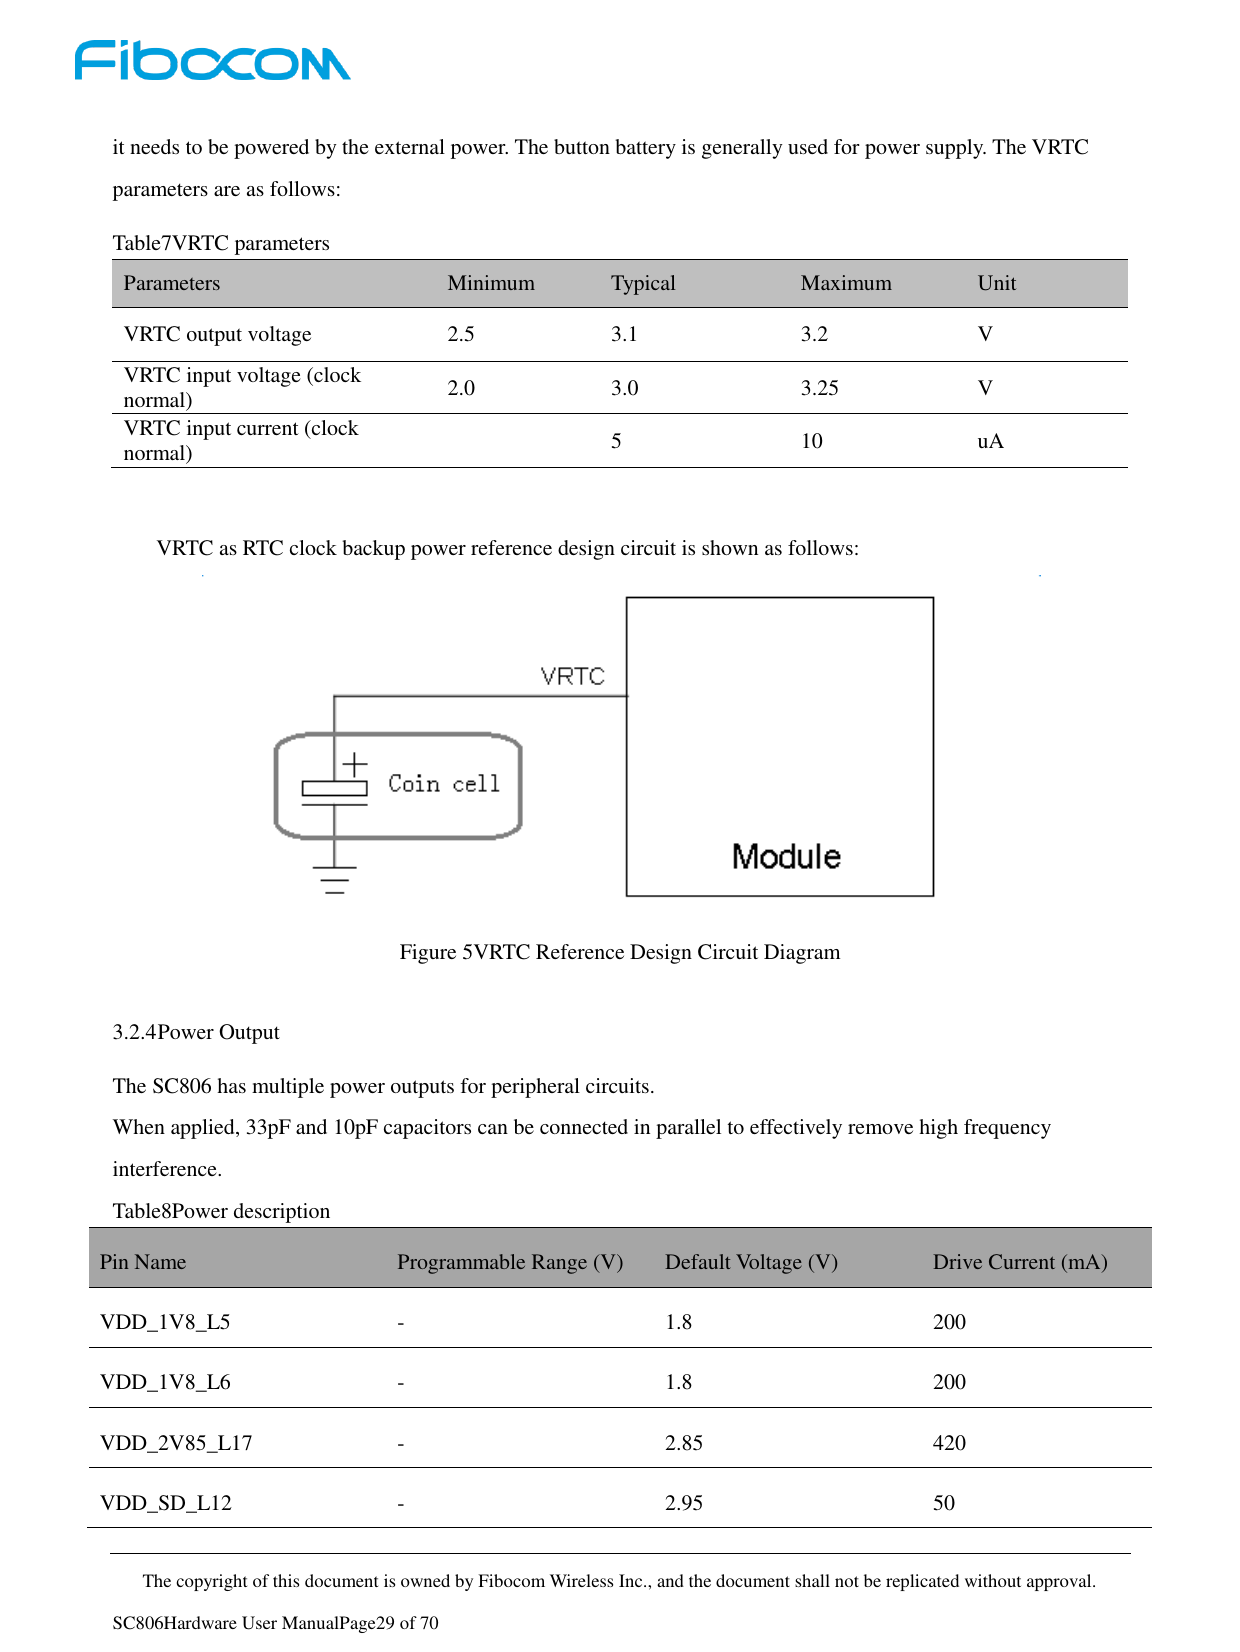     The copyright of this document is owned by Fibocom Wireless Inc., and the document shall not be replicated without approval.   SC806Hardware User ManualPage29 of 70 it needs to be powered by the external power. The button battery is generally used for power supply. The VRTC parameters are as follows: Table7VRTC parameters Parameters Minimum Typical Maximum Unit VRTC output voltage 2.5 3.1 3.2 V VRTC input voltage (clock normal) 2.0 3.0 3.25 V VRTC input current (clock normal)  5 10 uA  VRTC as RTC clock backup power reference design circuit is shown as follows:  Figure 5VRTC Reference Design Circuit Diagram  3.2.4 Power Output The SC806 has multiple power outputs for peripheral circuits. When applied, 33pF and 10pF capacitors can be connected in parallel to effectively remove high frequency interference. Table8Power description Pin Name Programmable Range (V) Default Voltage (V) Drive Current (mA) VDD_1V8_L5 - 1.8 200 VDD_1V8_L6 - 1.8 200 VDD_2V85_L17 - 2.85 420 VDD_SD_L12 - 2.95 50 